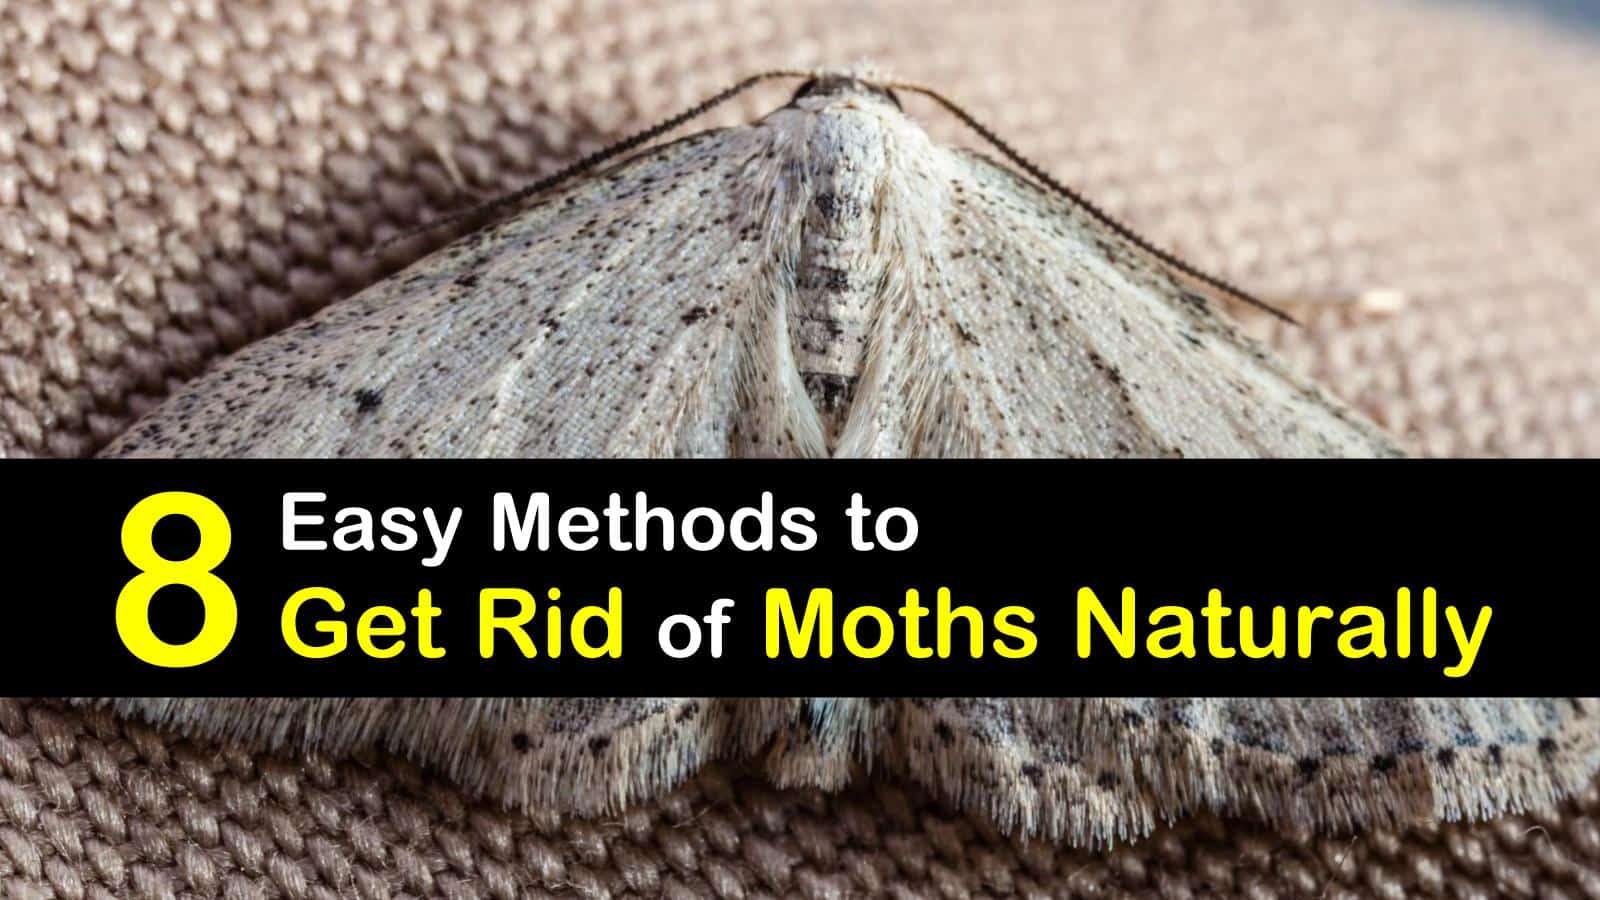 How to stop clothes moths